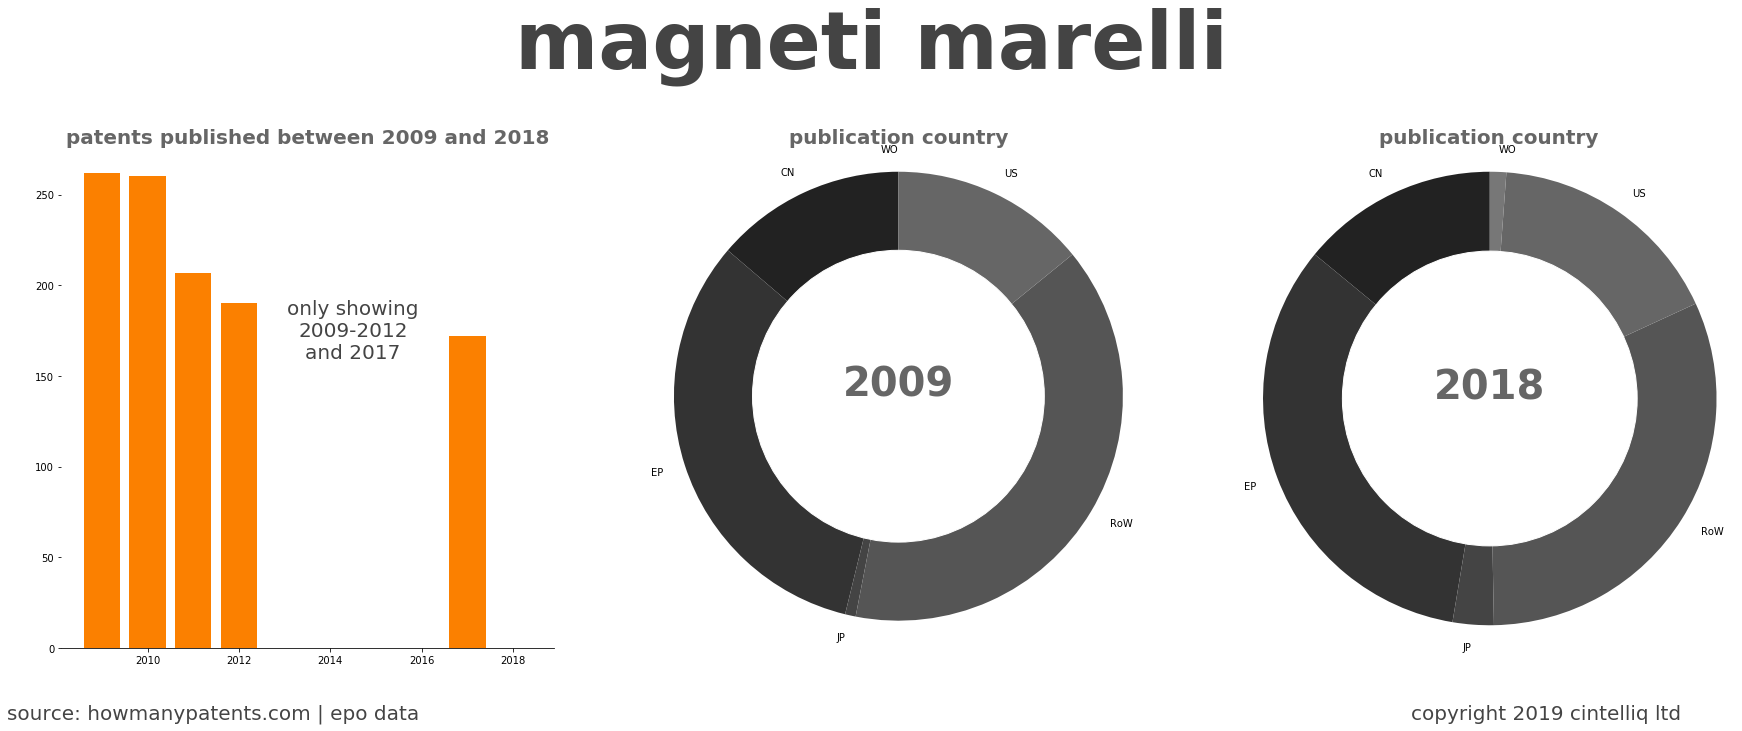 summary of patents for Magneti Marelli